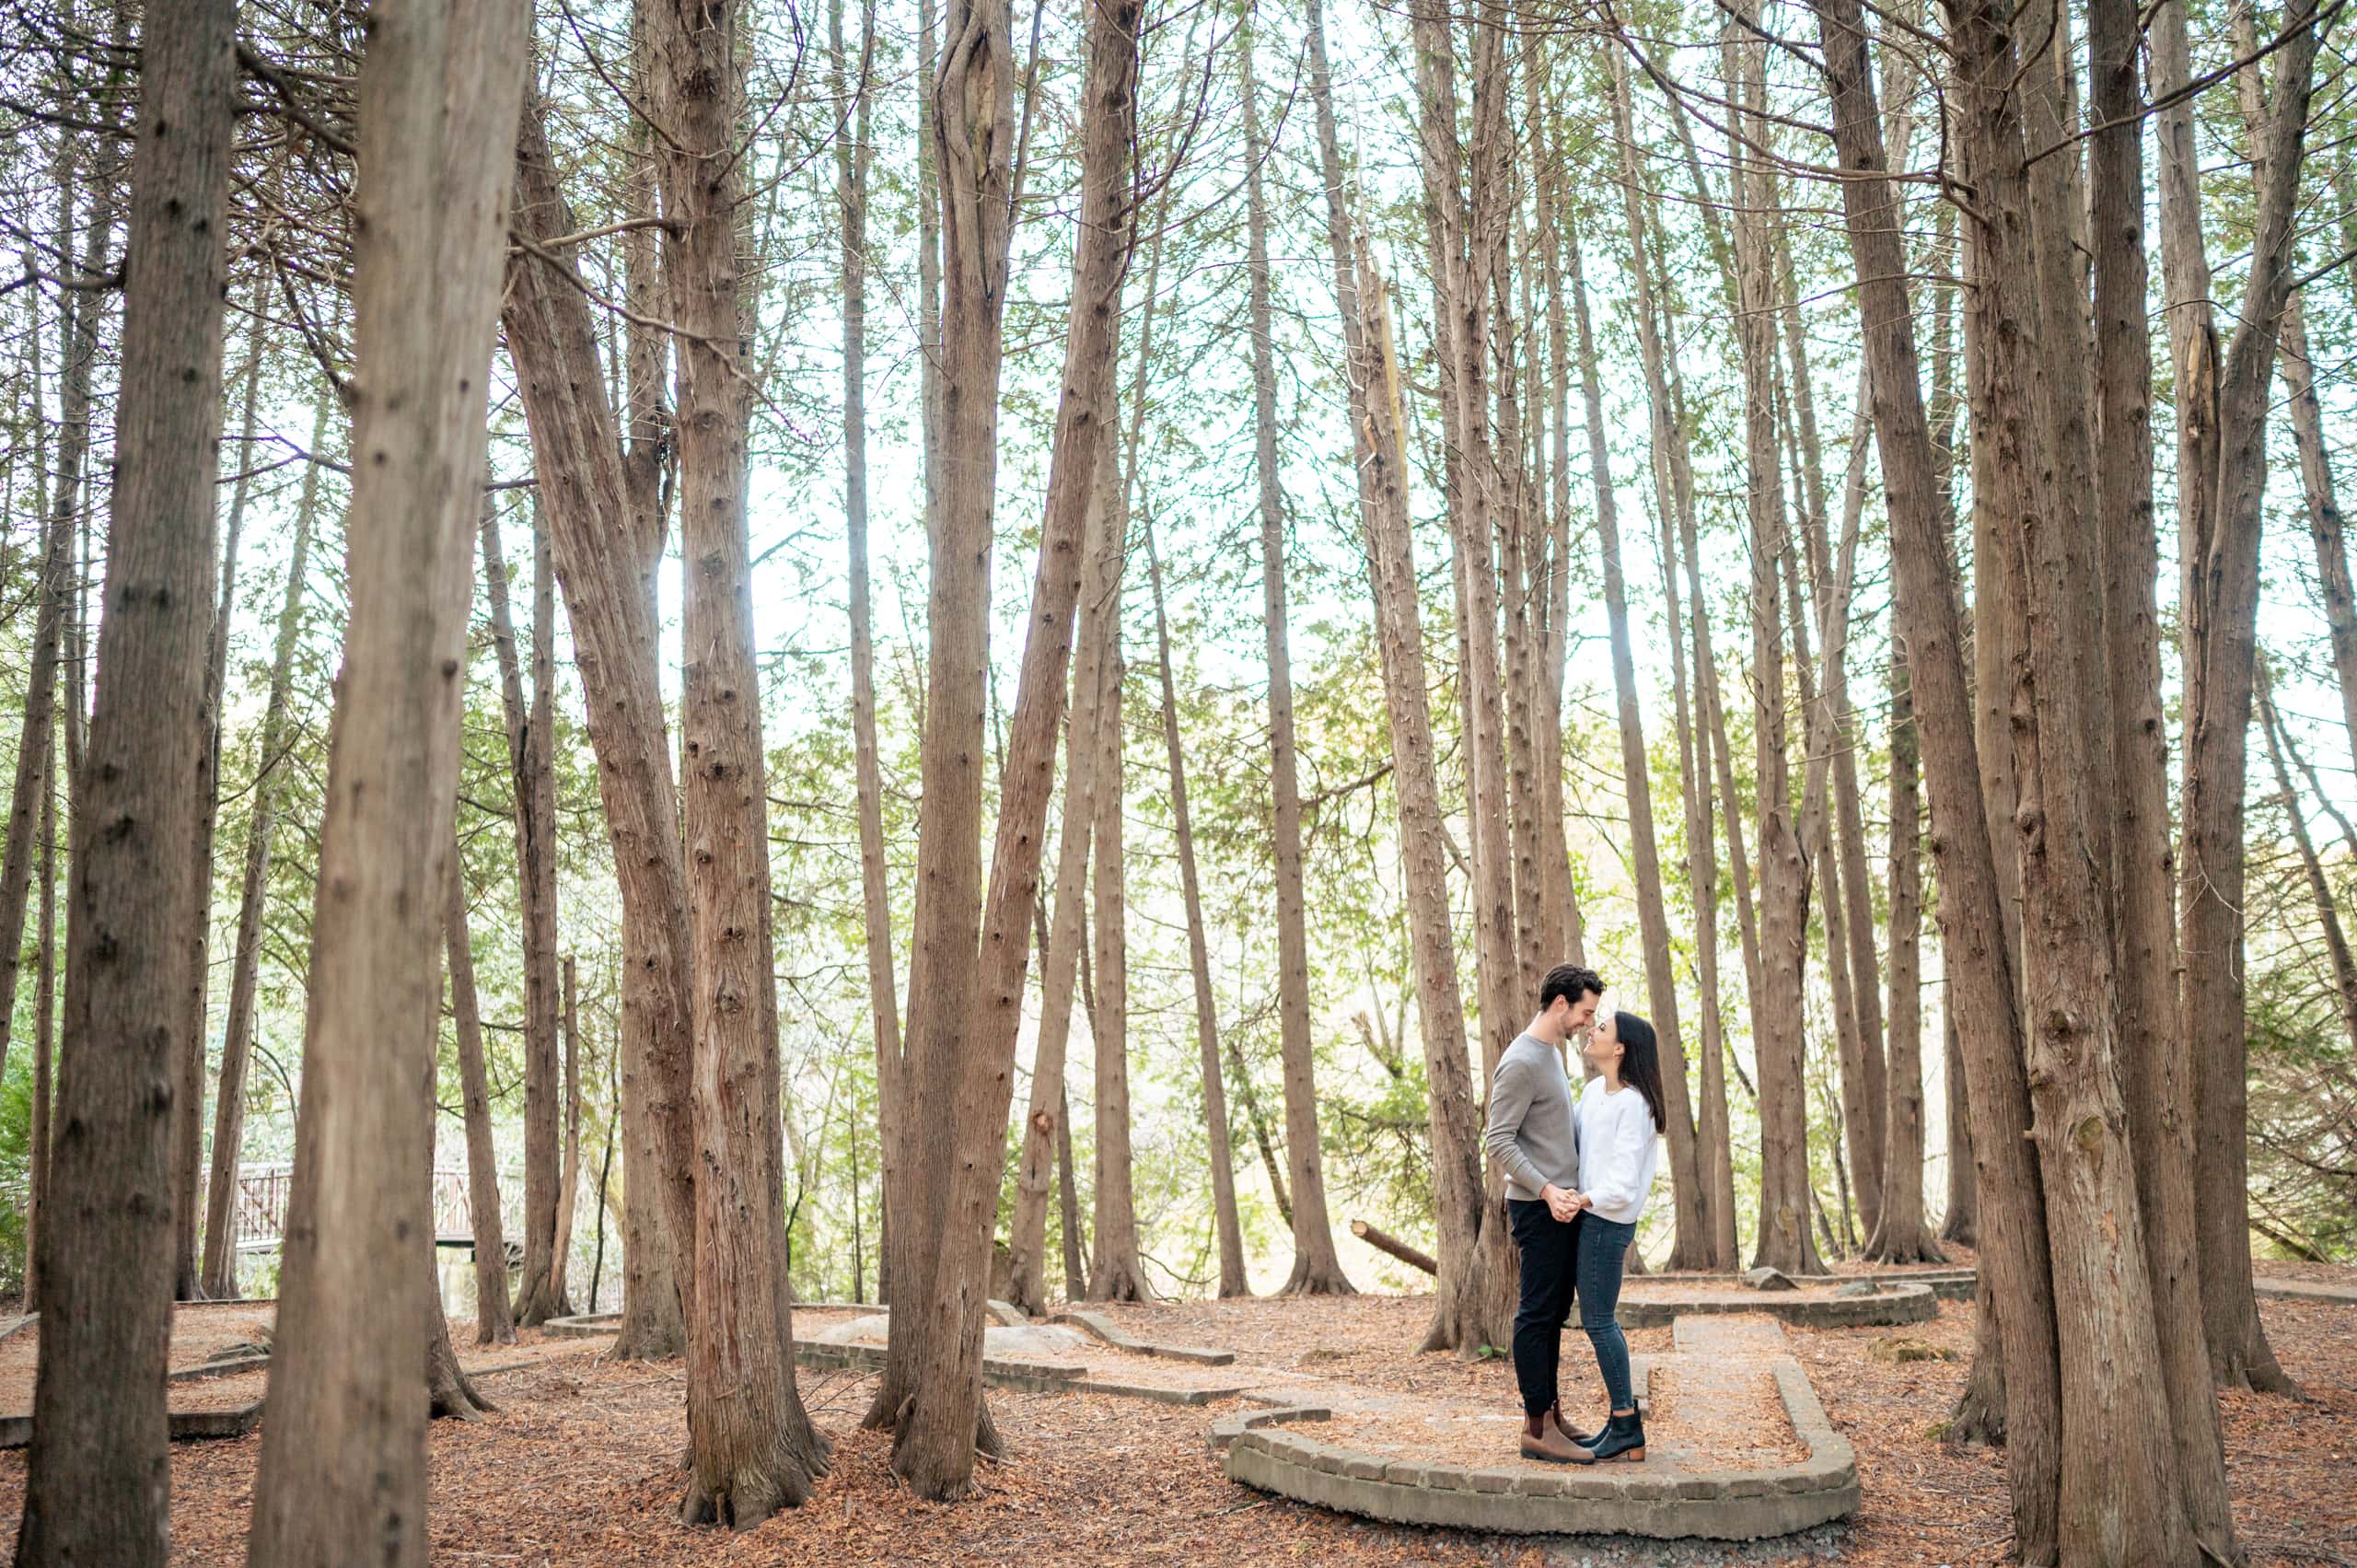 cullen park engagement photos by Durham Region Wedding Photographer Brian Ly Photography